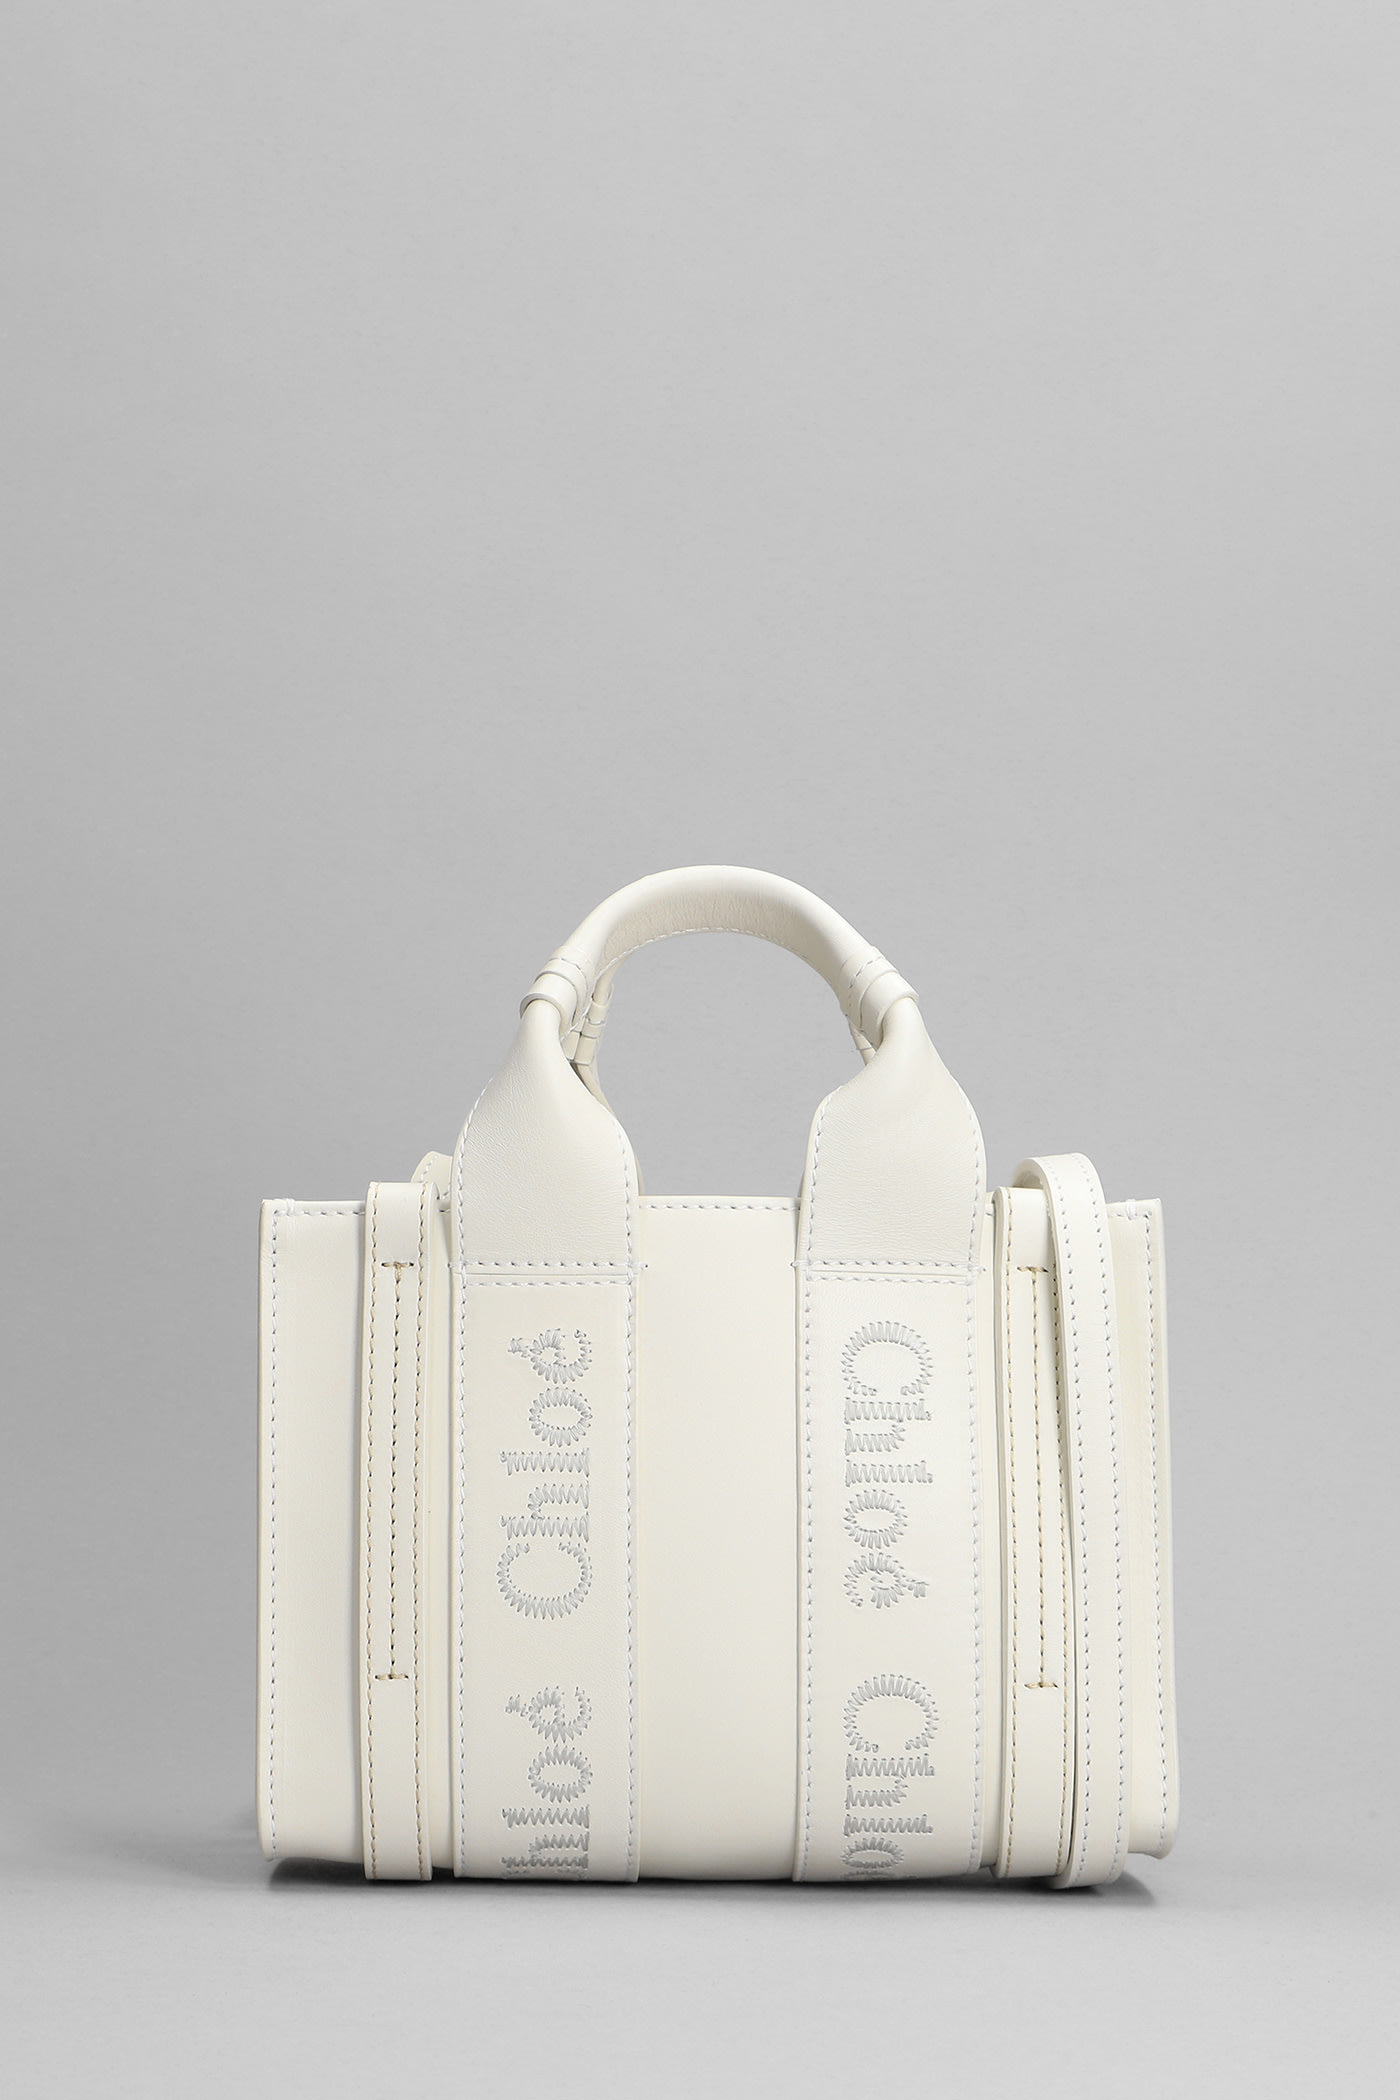 CHLOÉ WOODY HAND BAG IN WHITE LEATHER